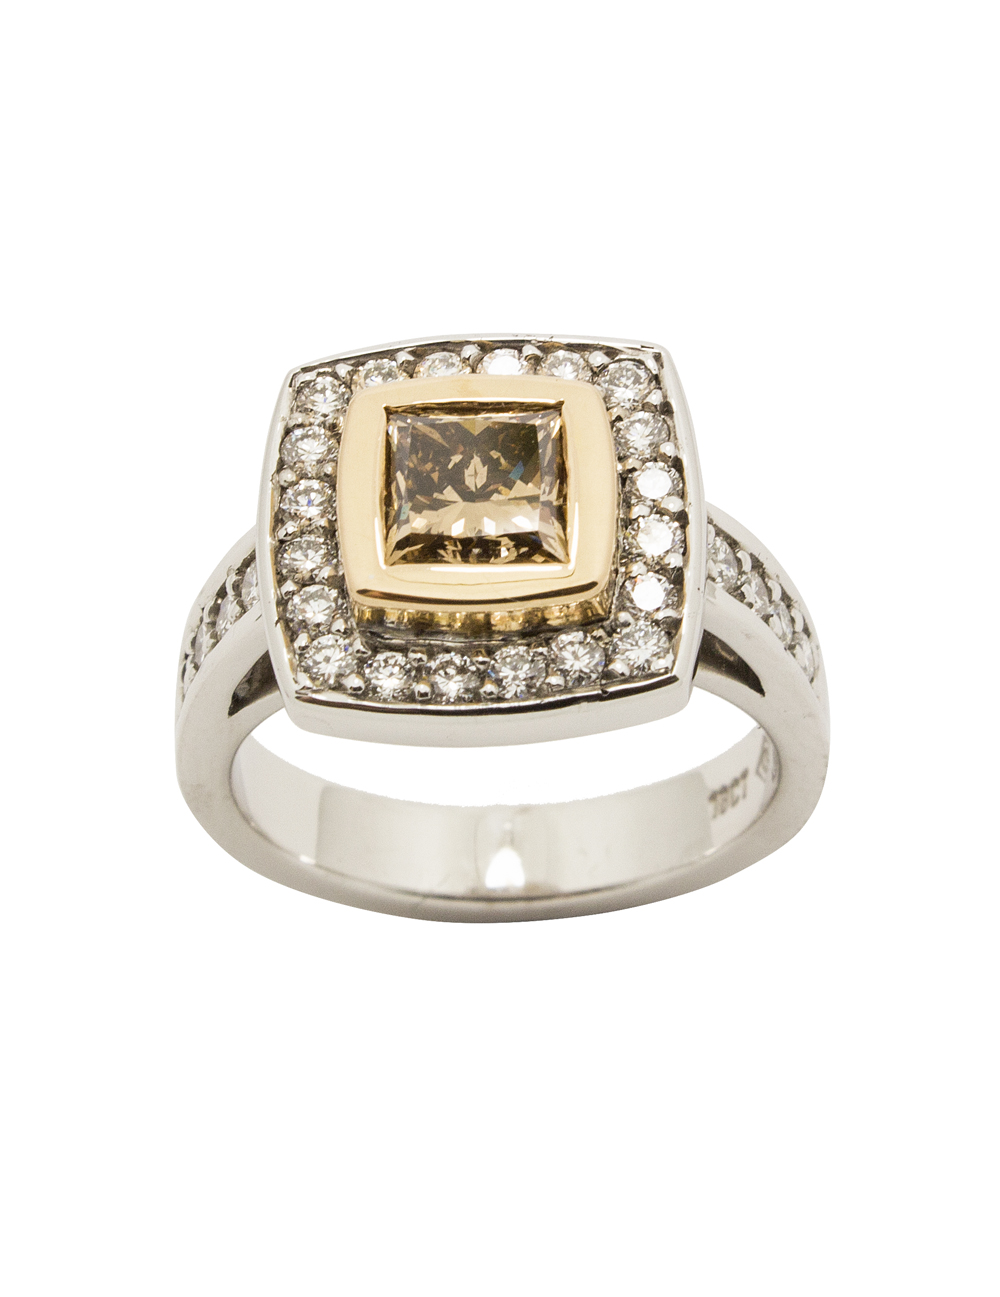 Ring, $13,950, by Goldsmith Gallery Designer Jewellers.